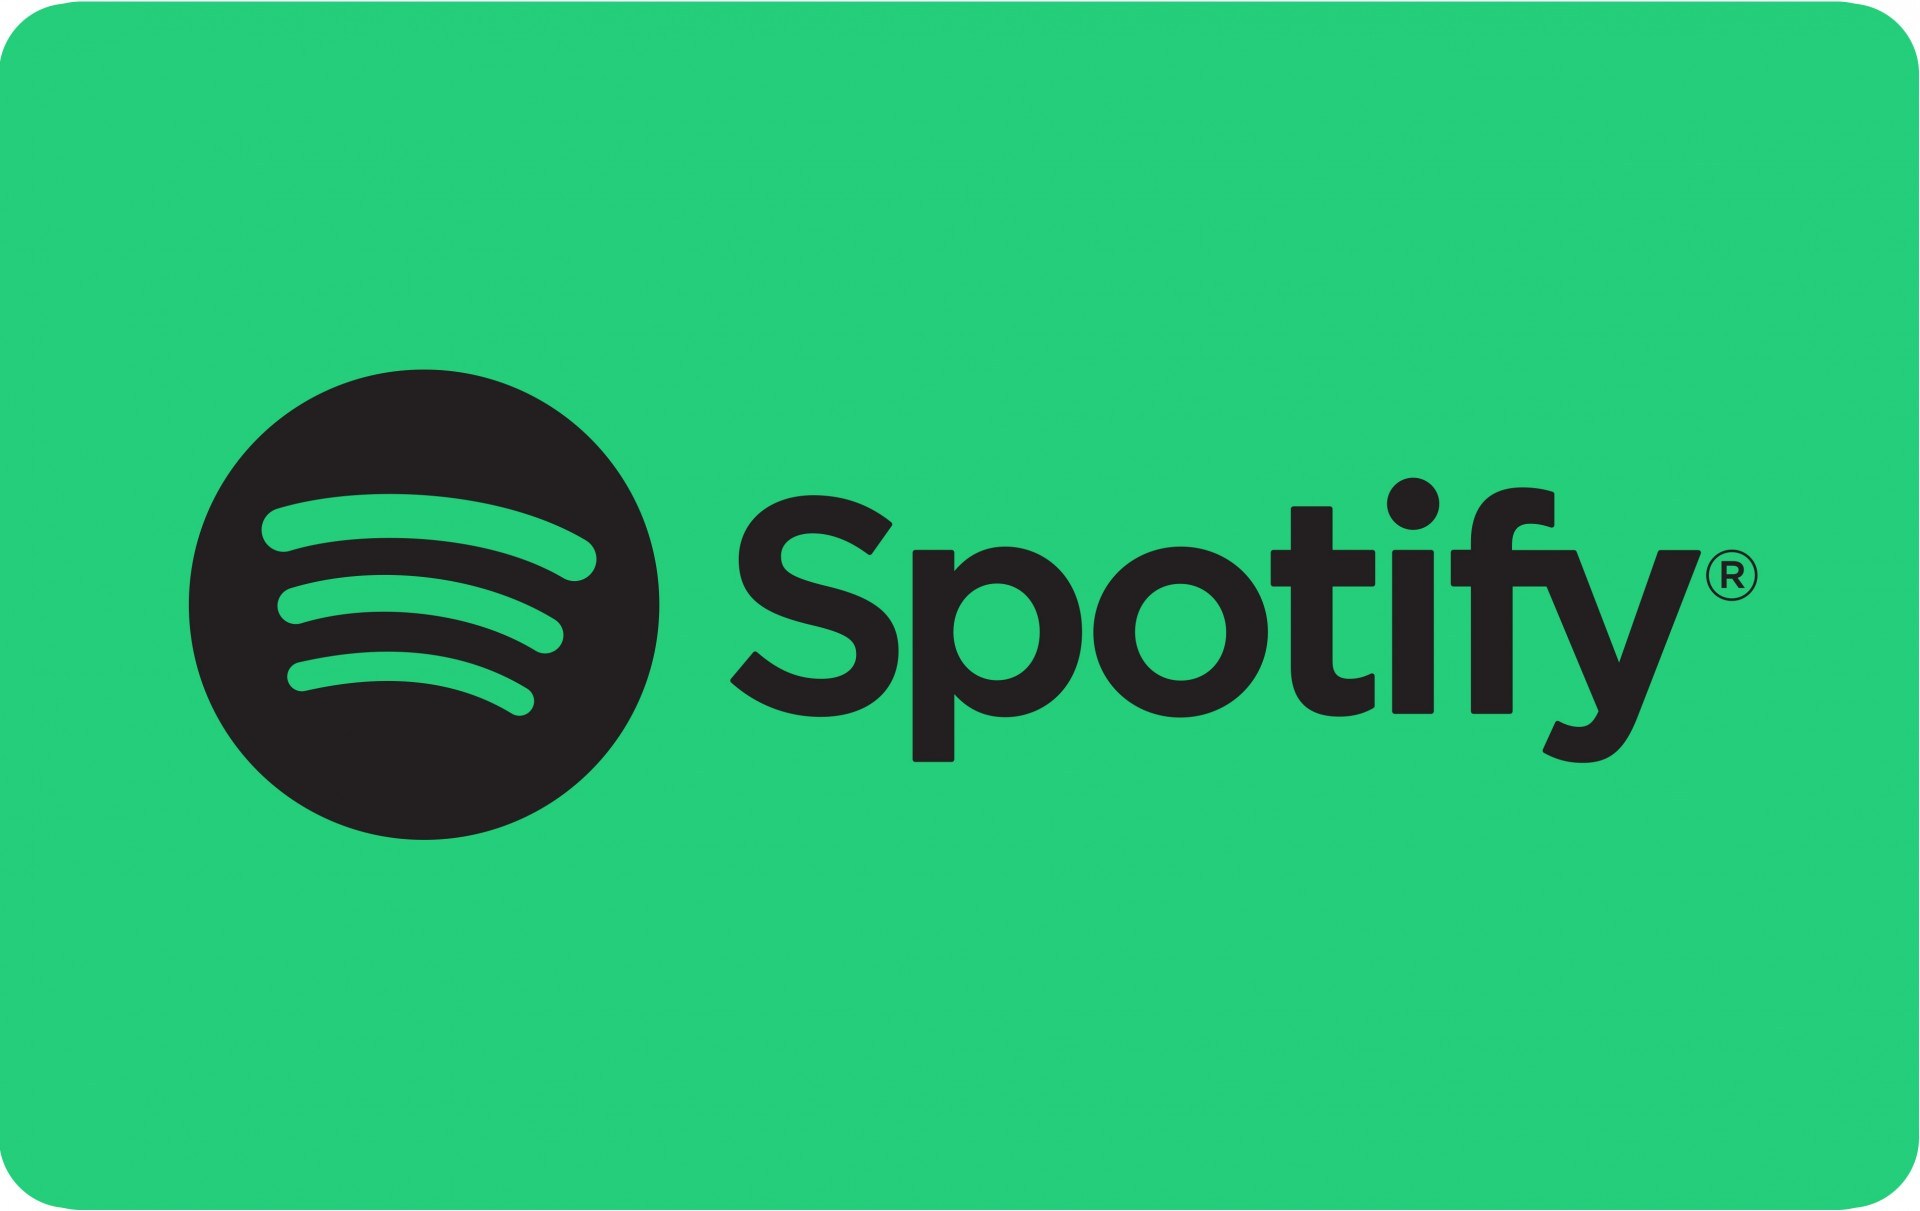 Spotify Differences Between their A Class Shares and B Class Shares